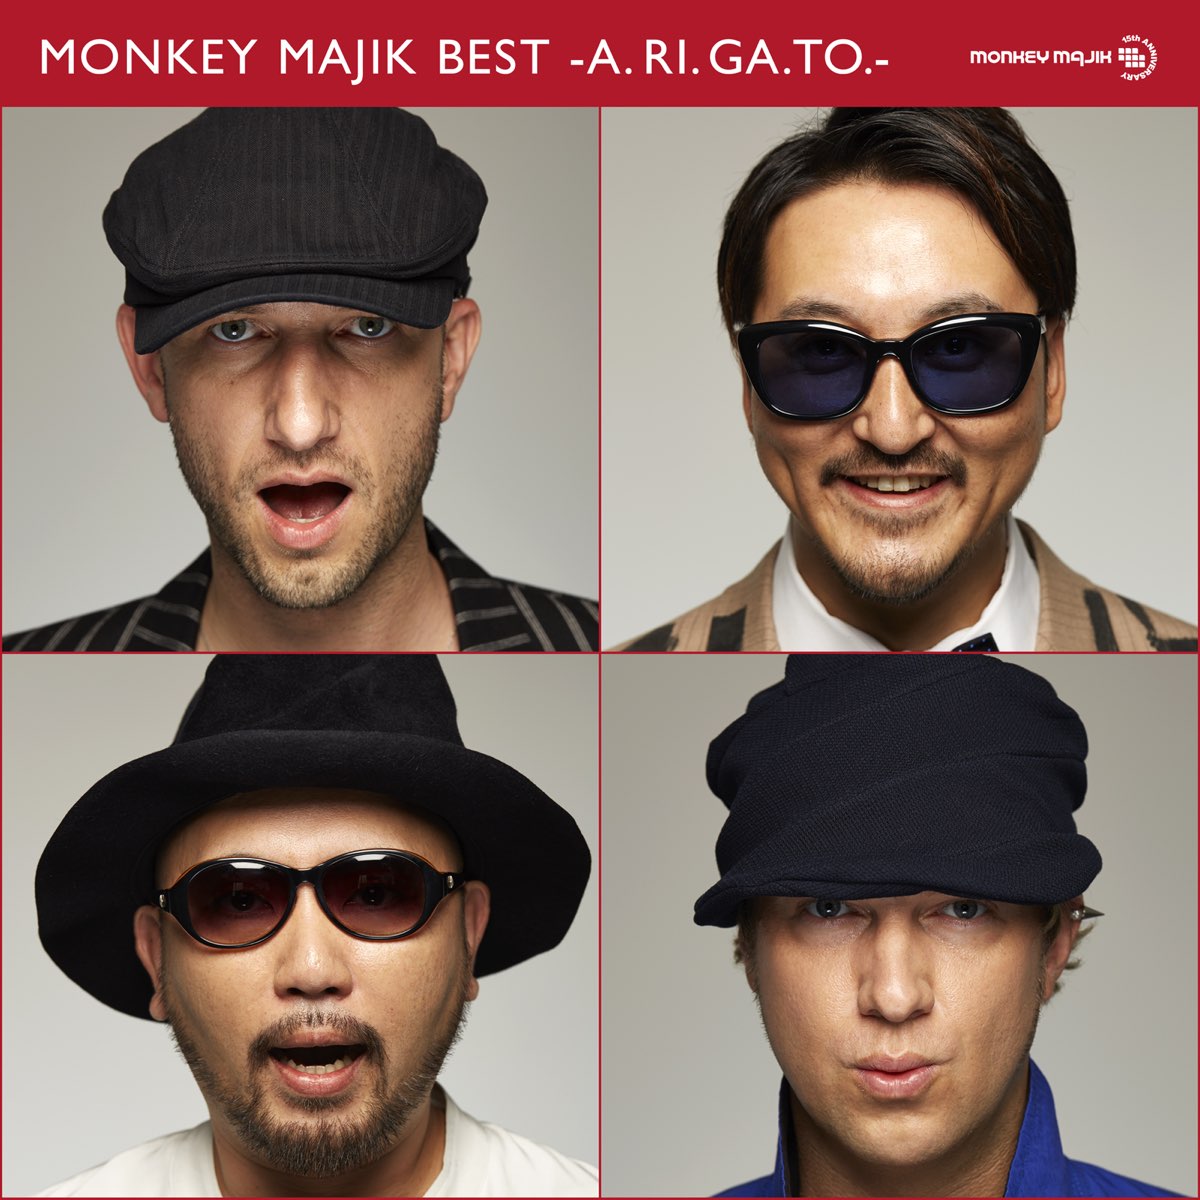 MONKEY MAJIK BEST -Special Selection Edition by Maynard, Blaise, TAX & DICK-